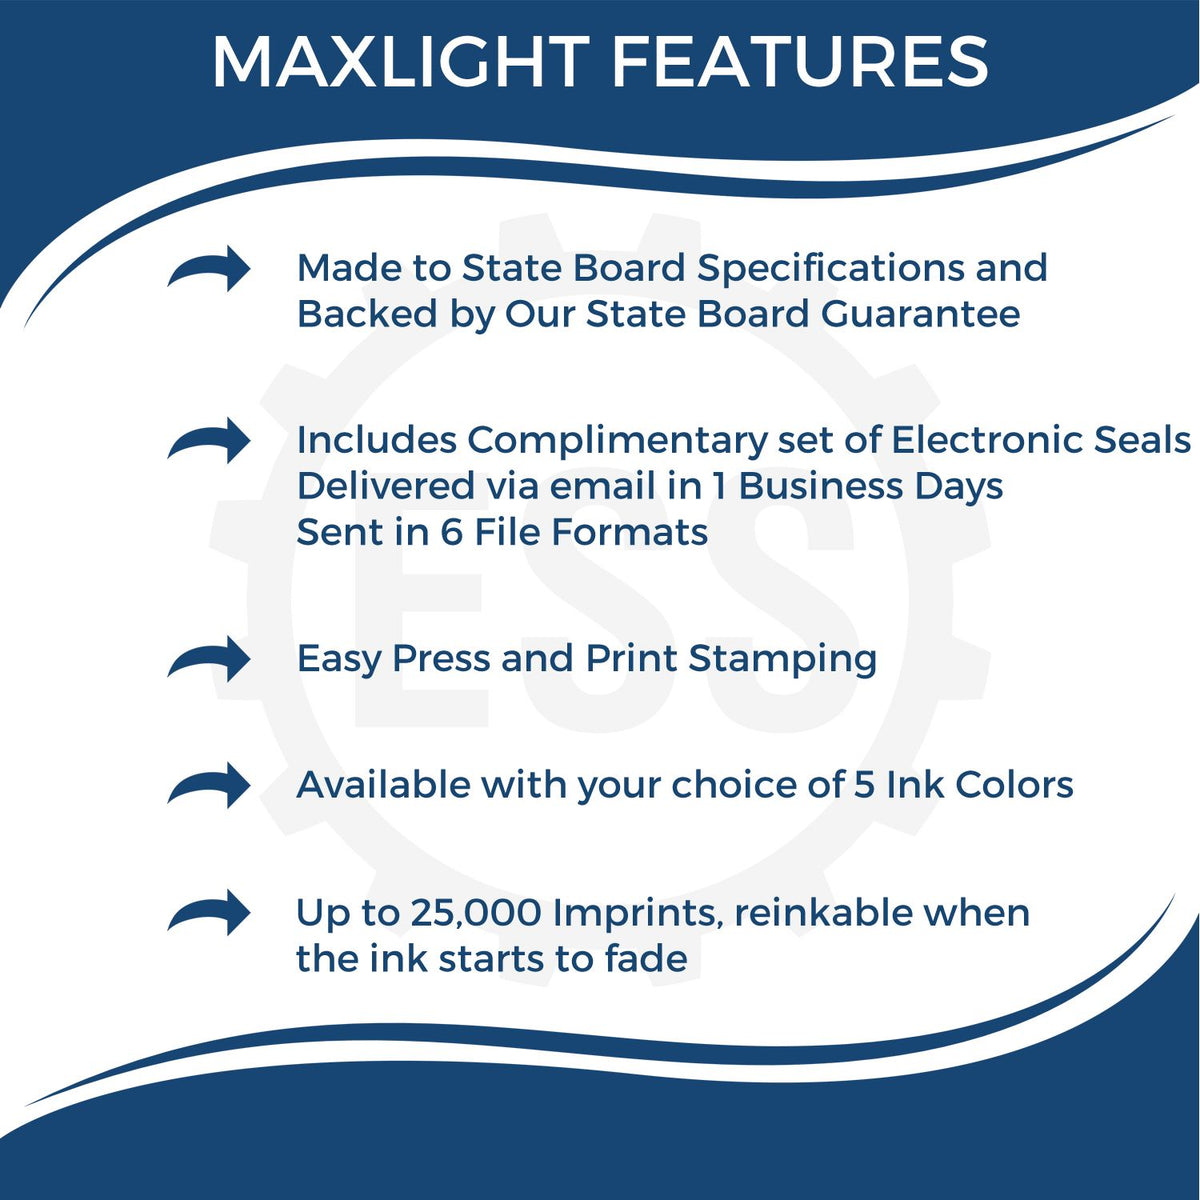 A picture of an infographic highlighting the selling points for the Premium MaxLight Pre-Inked Indiana Engineering Stamp